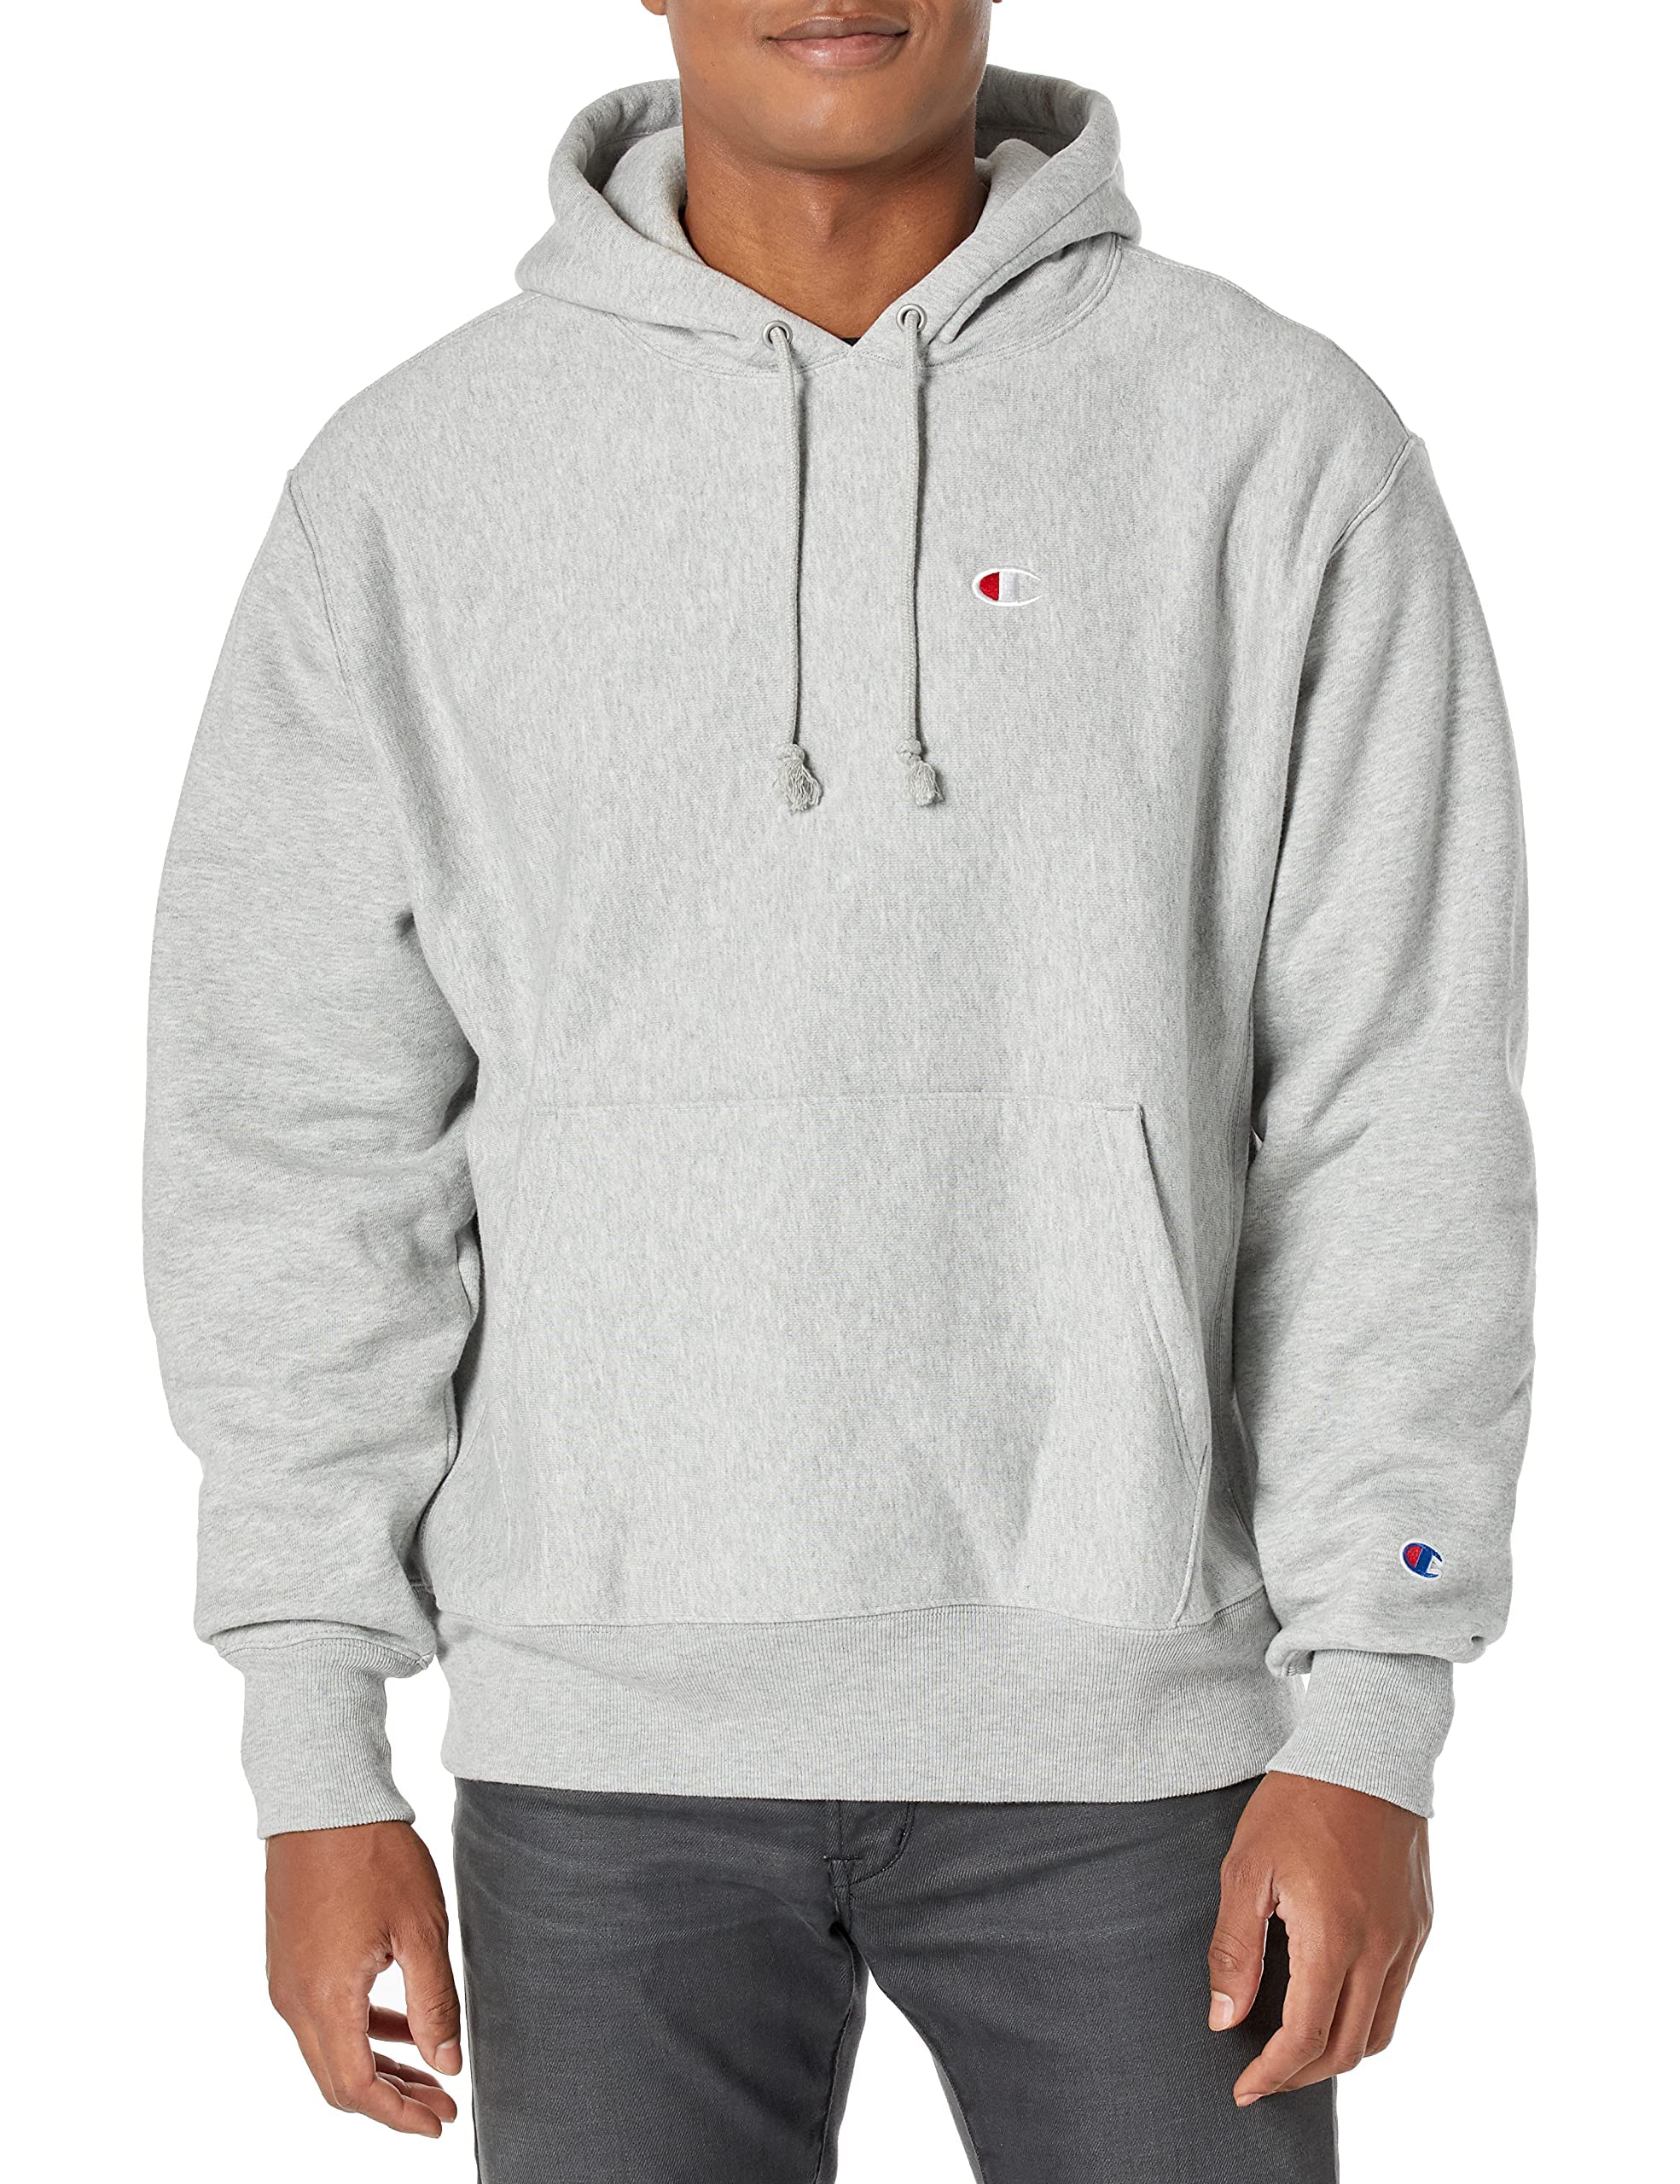 Champion Men's Hoodie, Reverse Weave Fleece Comfortable Pullover Sweatshirt (Oxford Gray, Sizes: XS, S, M, XL) $19.95 + Free Shipping w/ Prime or on $35+